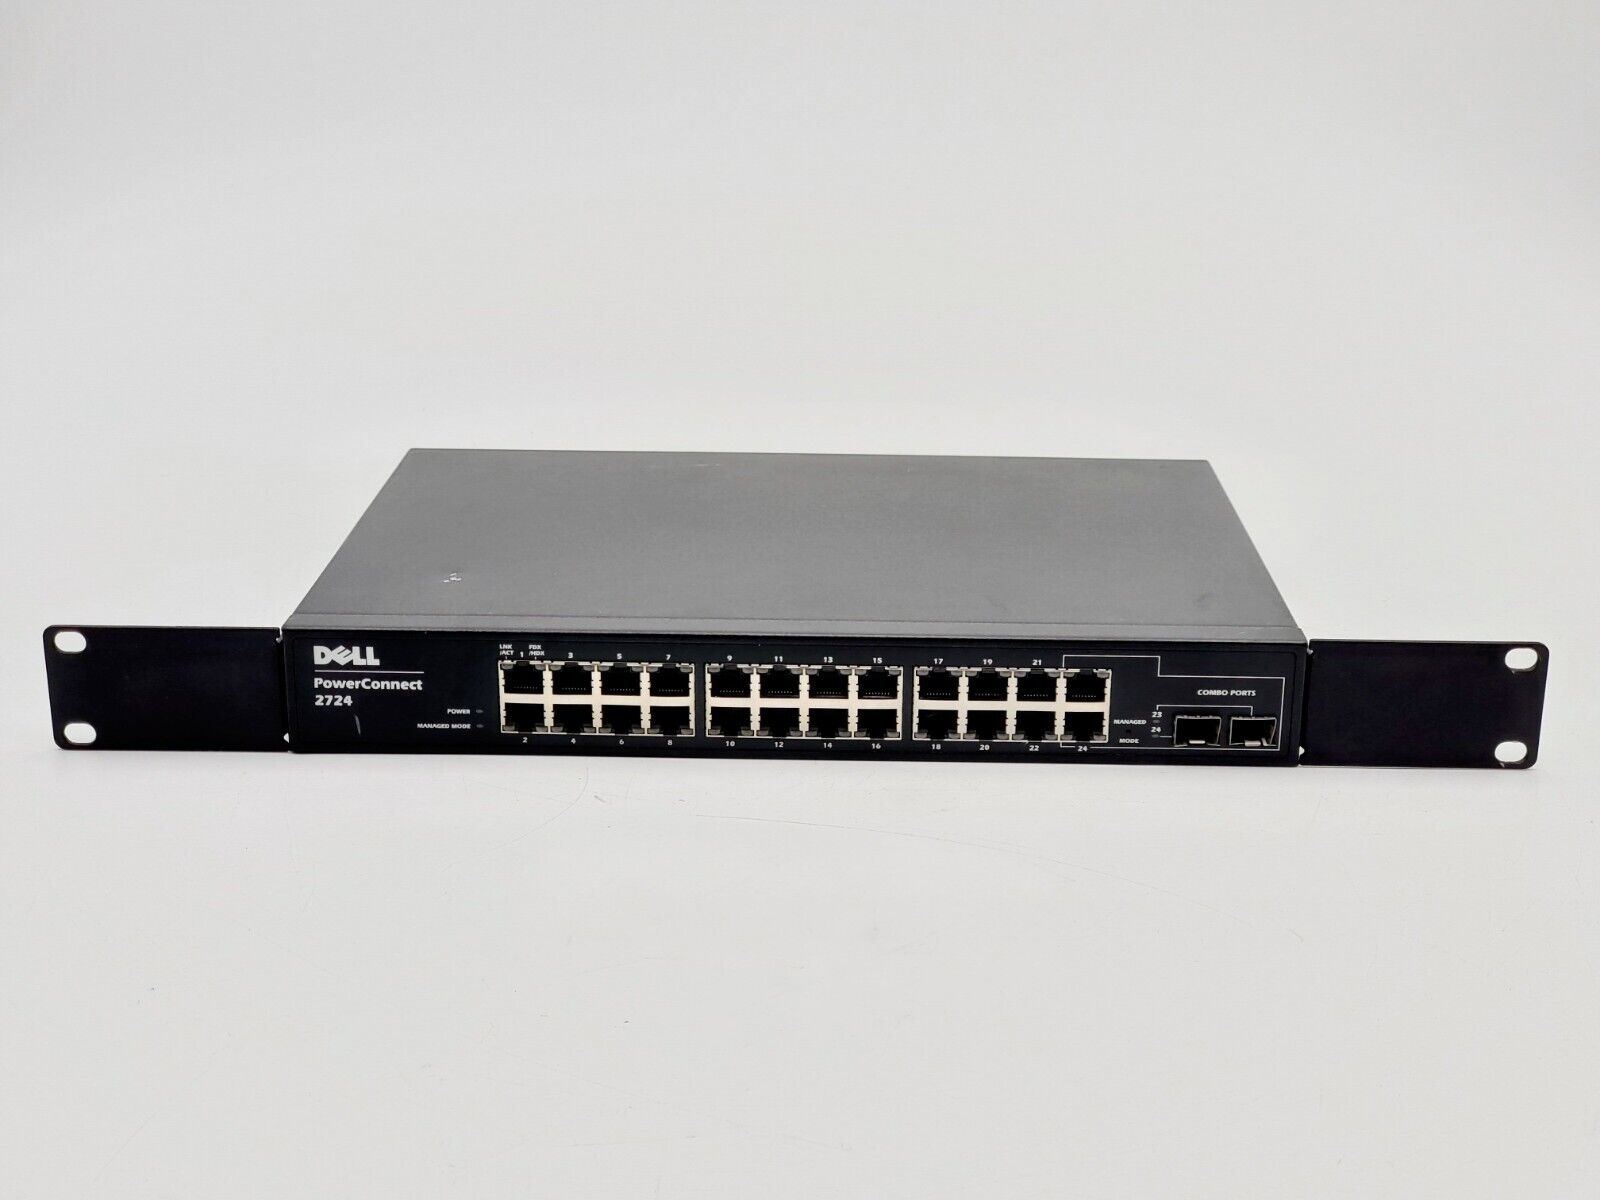 Dell PowerConnect 2724 24-Port W/ 2x-SFP Combo Ports & Rack Ears